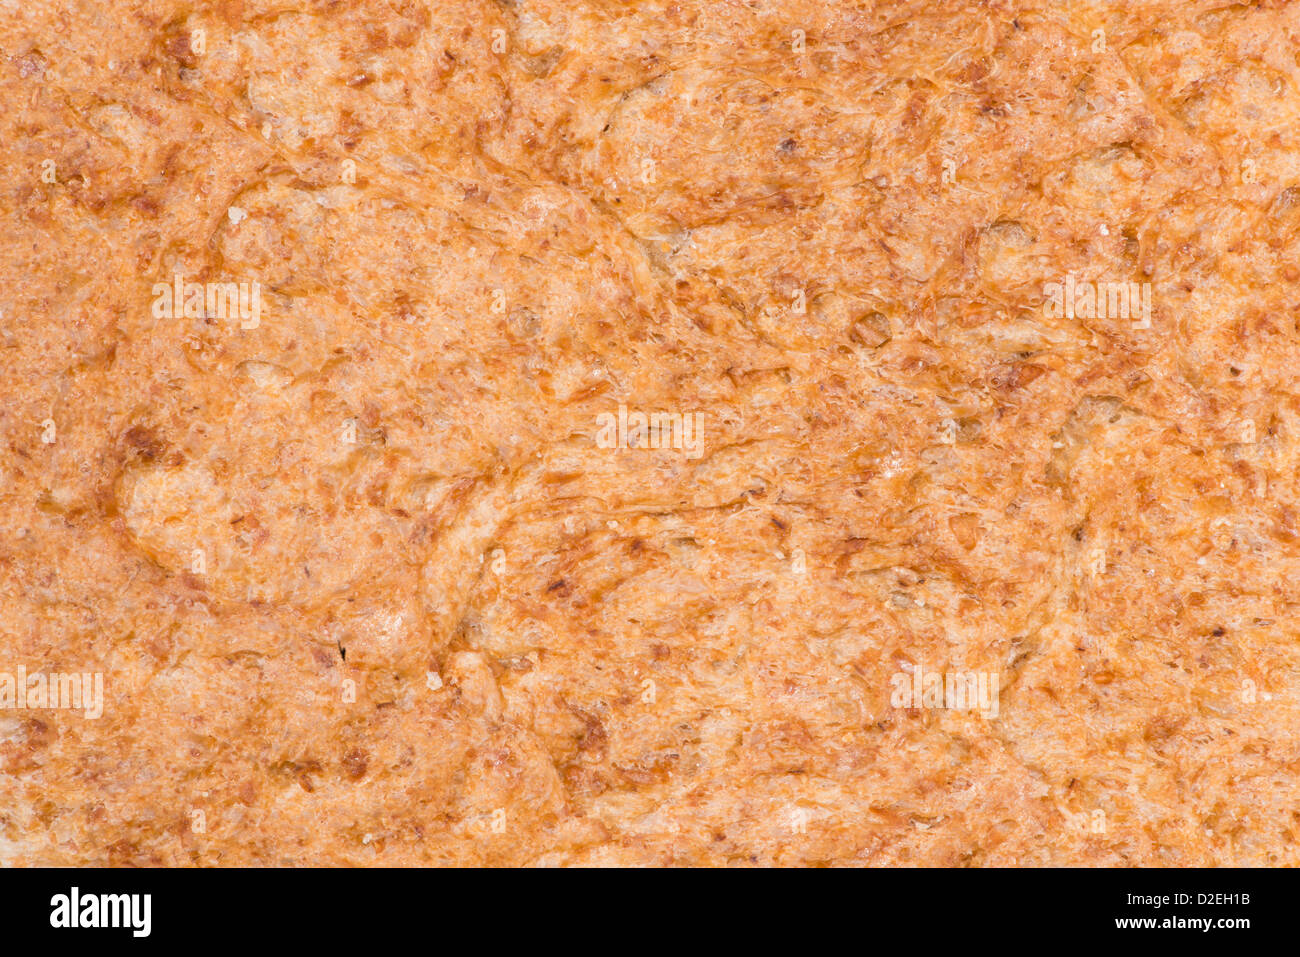 Close up of bread crust Stock Photo